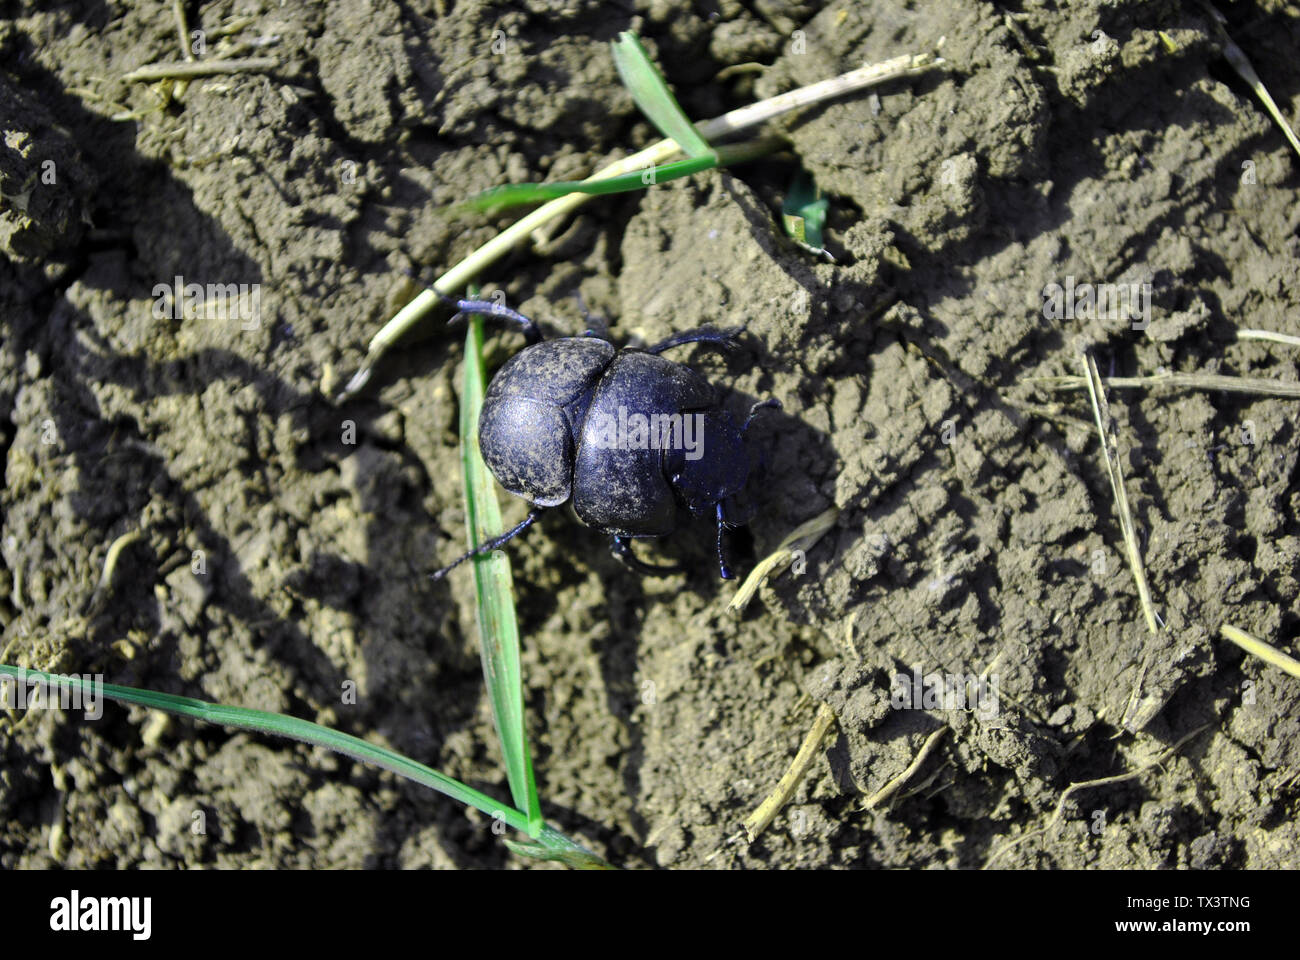 Geotrupidae (earth-boring dung beetle) bug crawling on gray soil with green grass background, top view Stock Photo